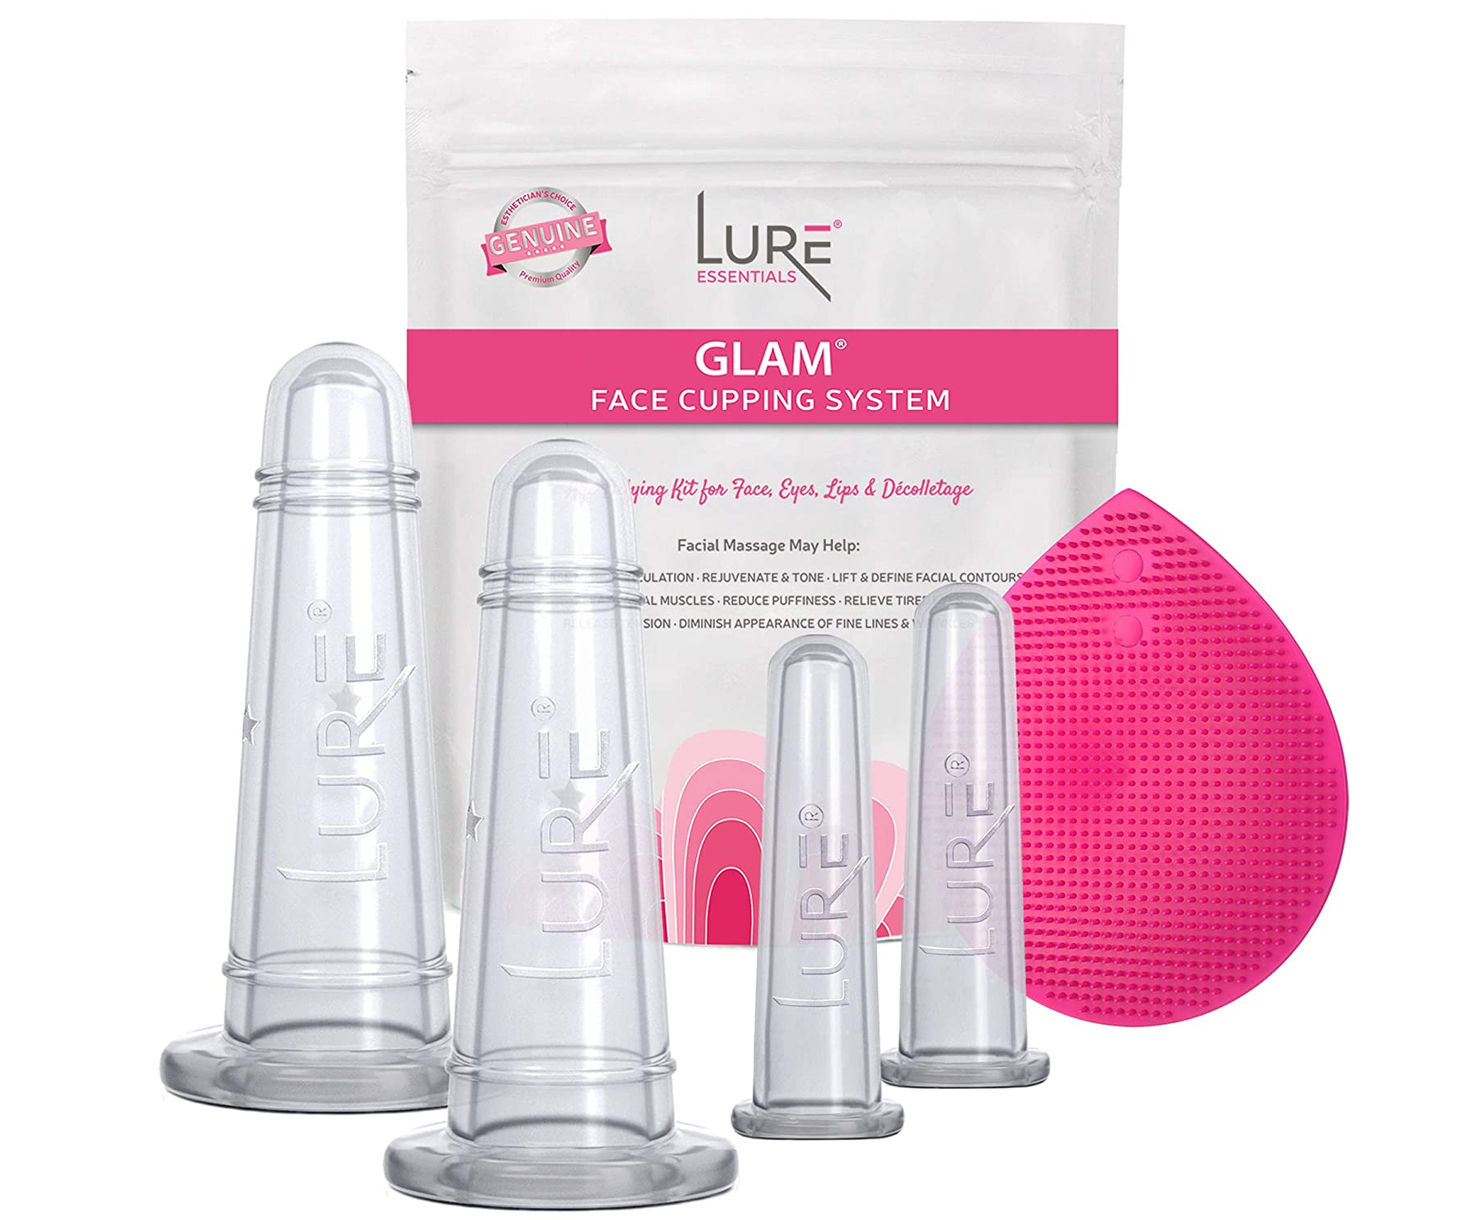 Lure Glam Face Cupping System